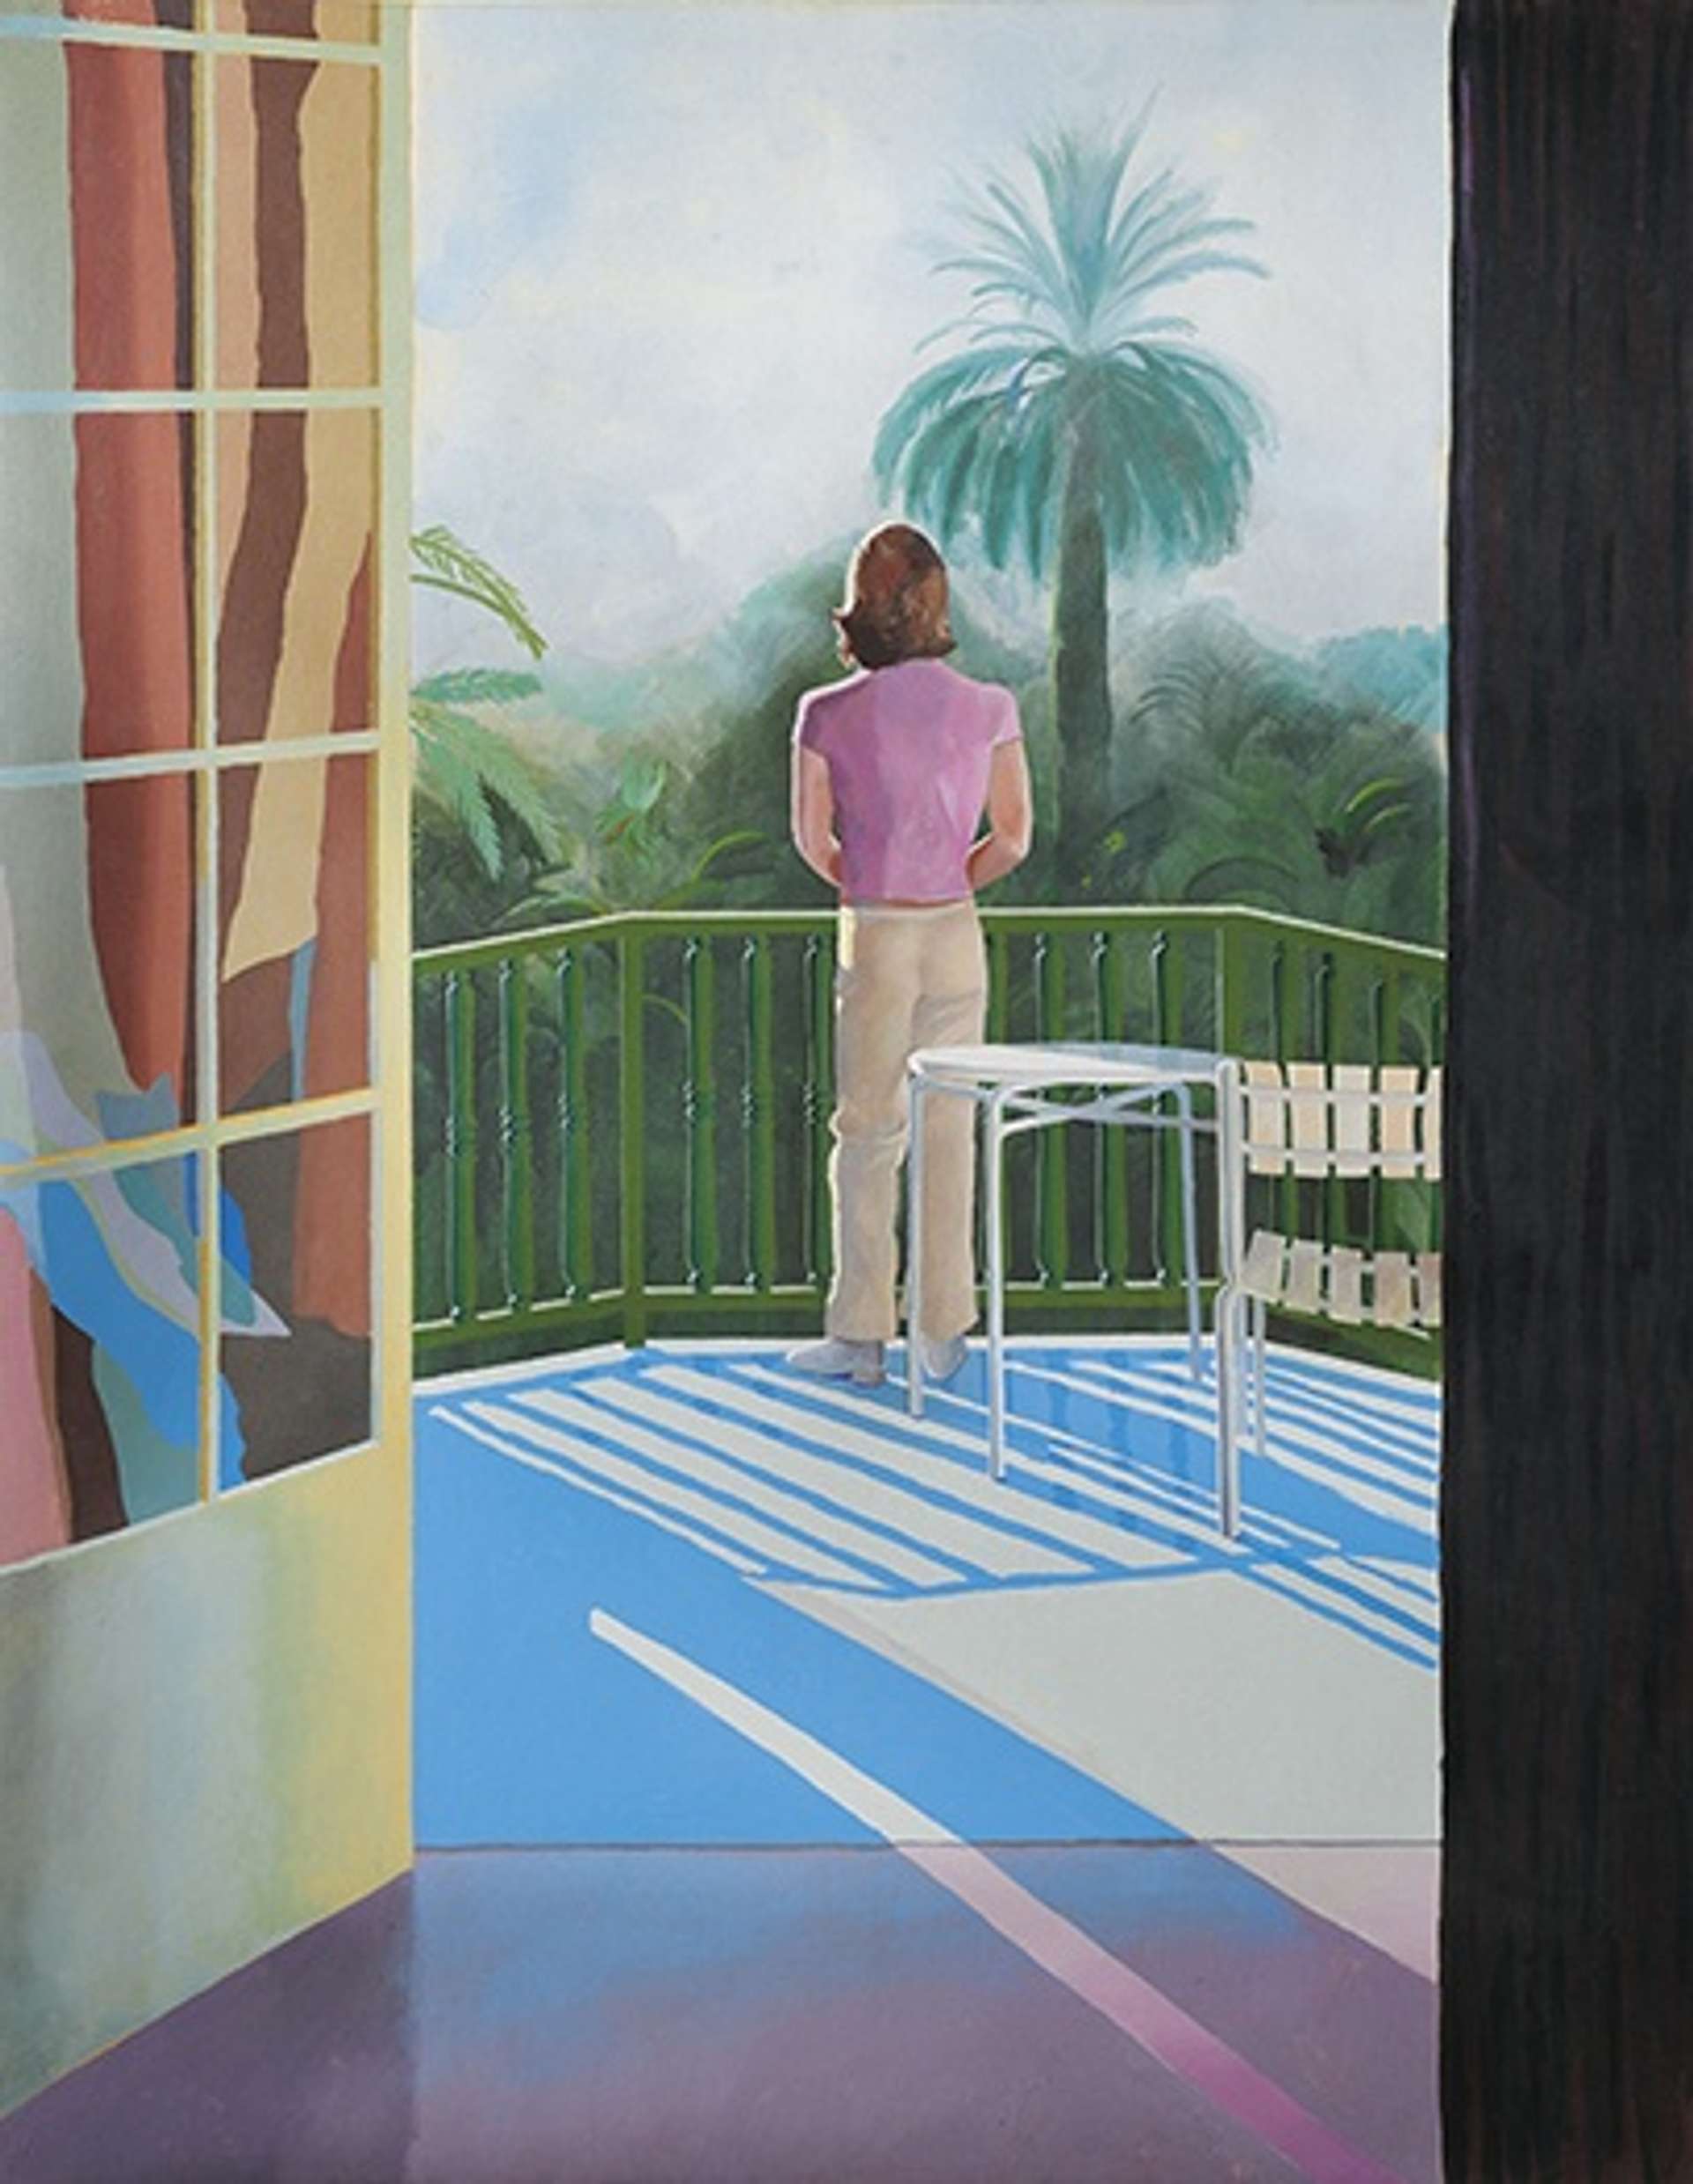 David Ross and the Royal Opera House's Hockney sale